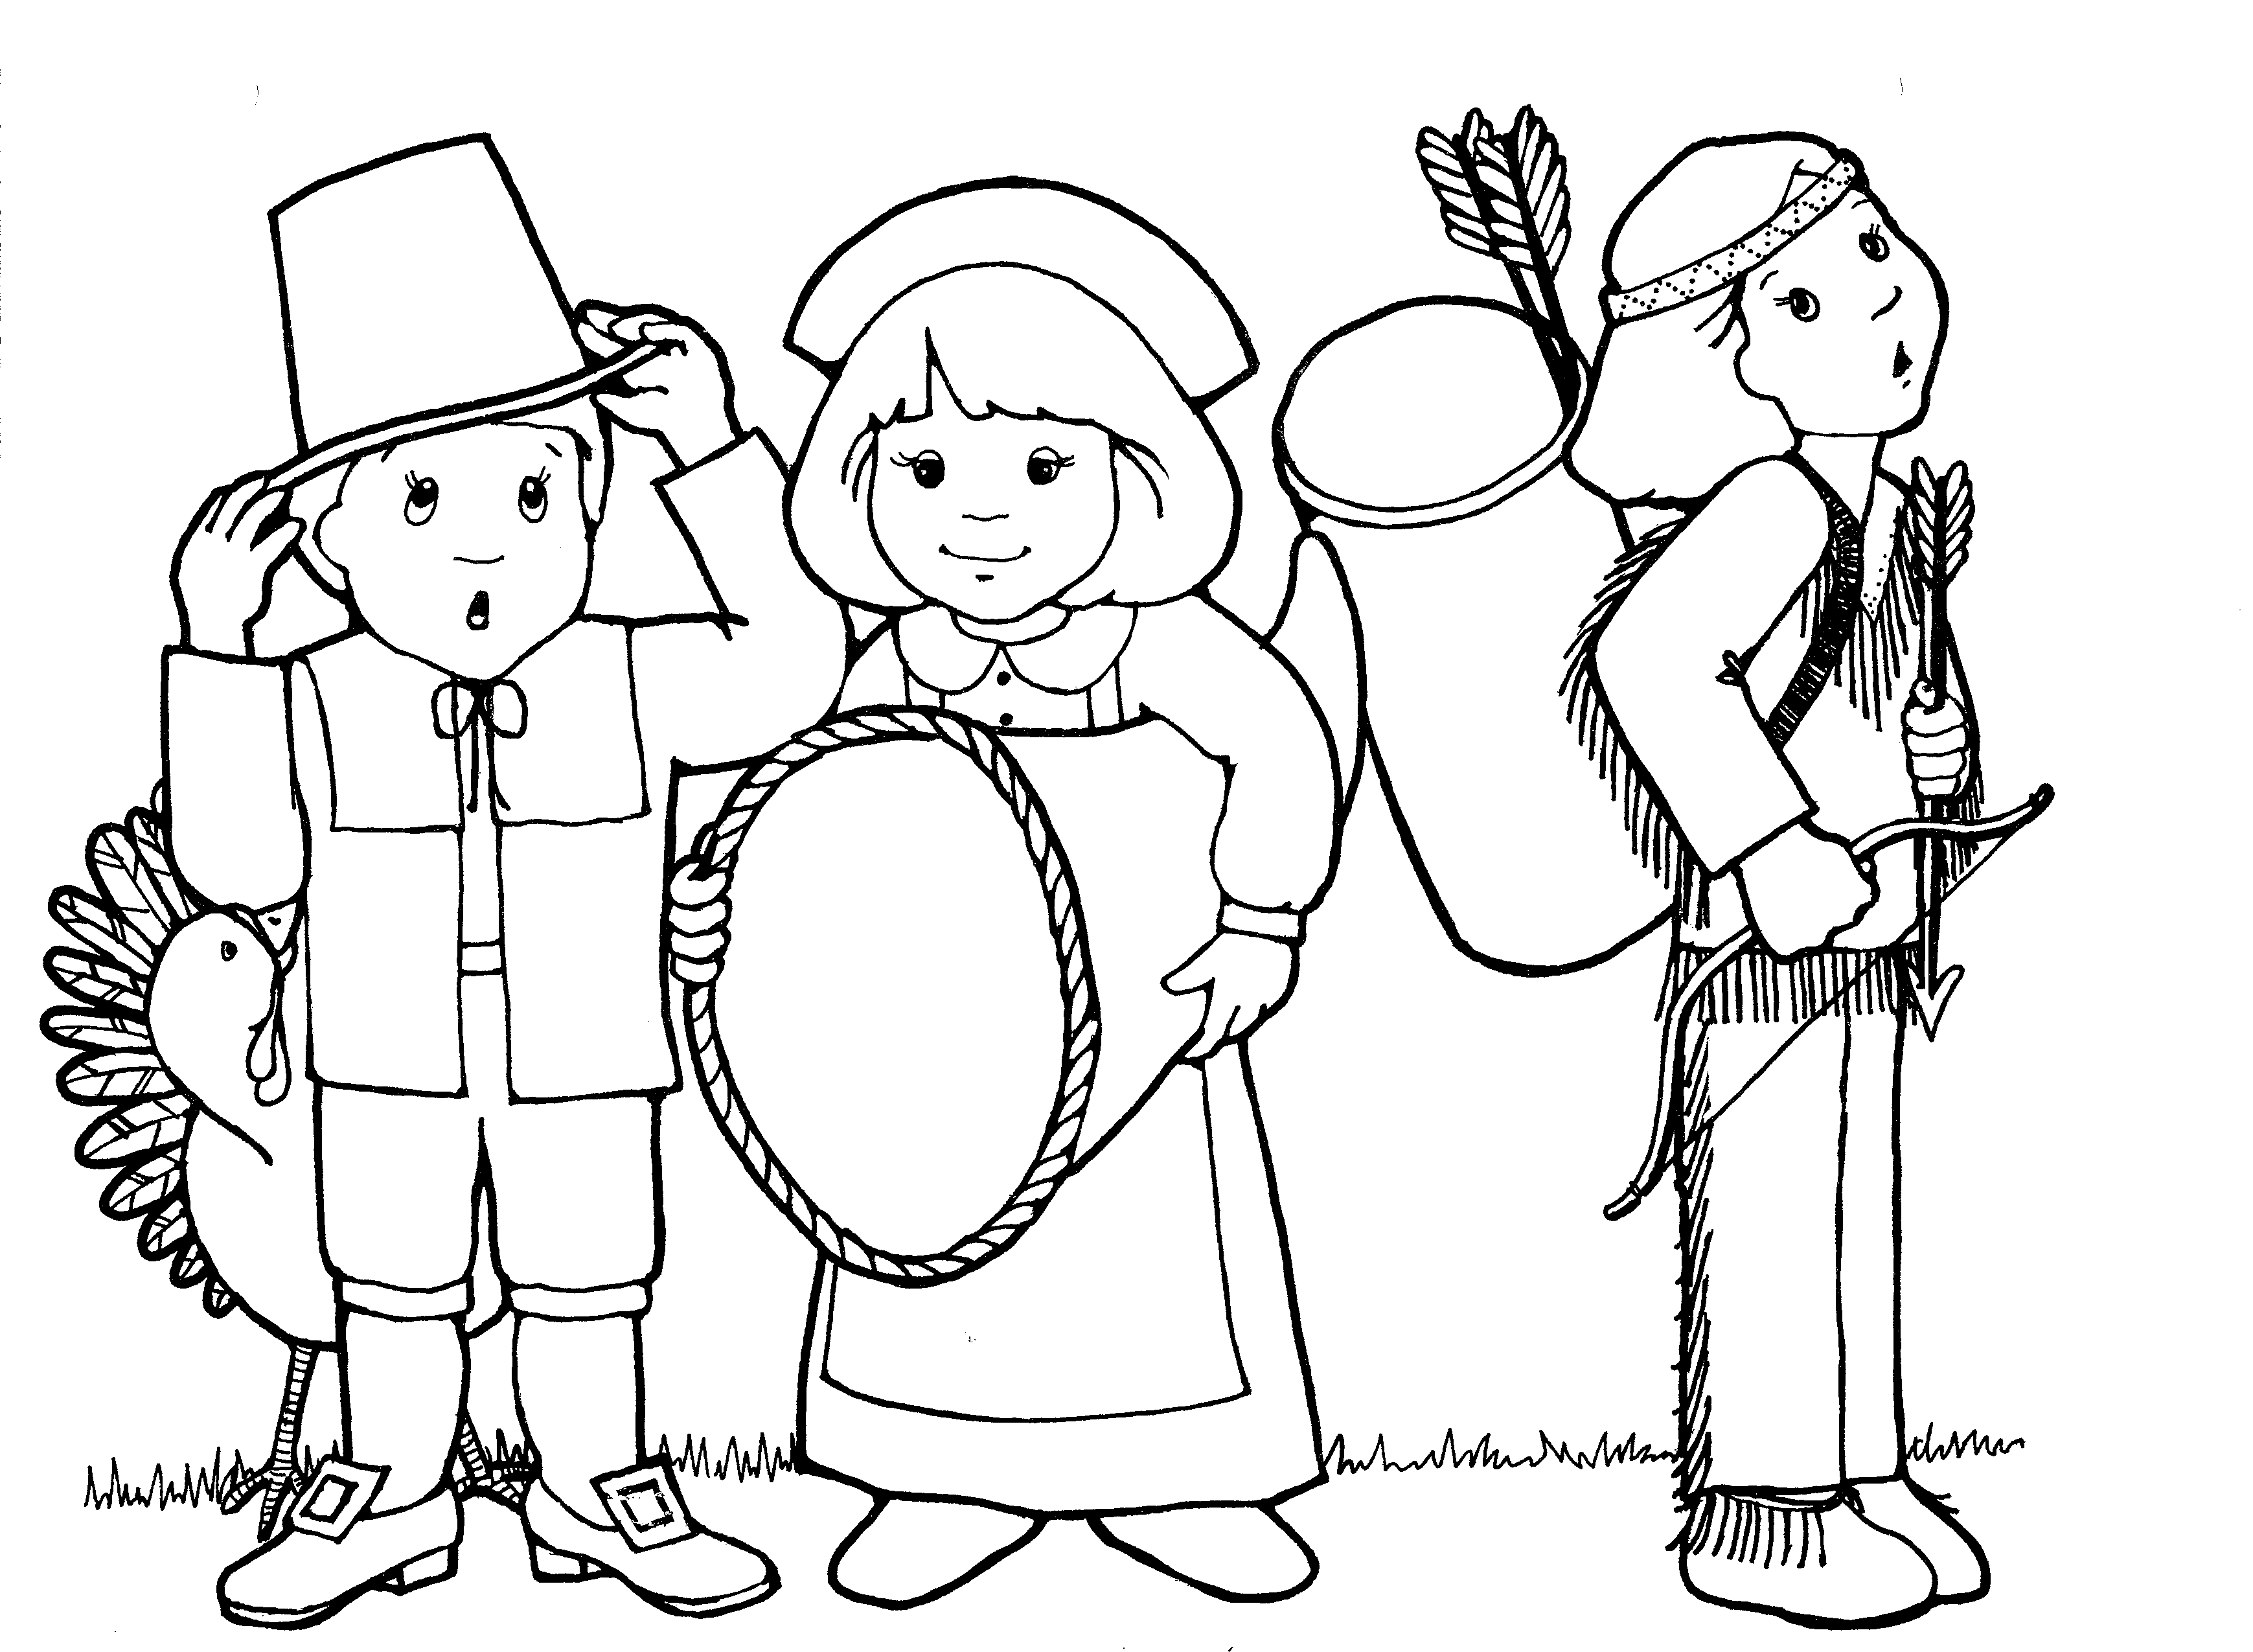 free-printable-pilgrim-coloring-pages-for-kids-best-coloring-pages-for-kids